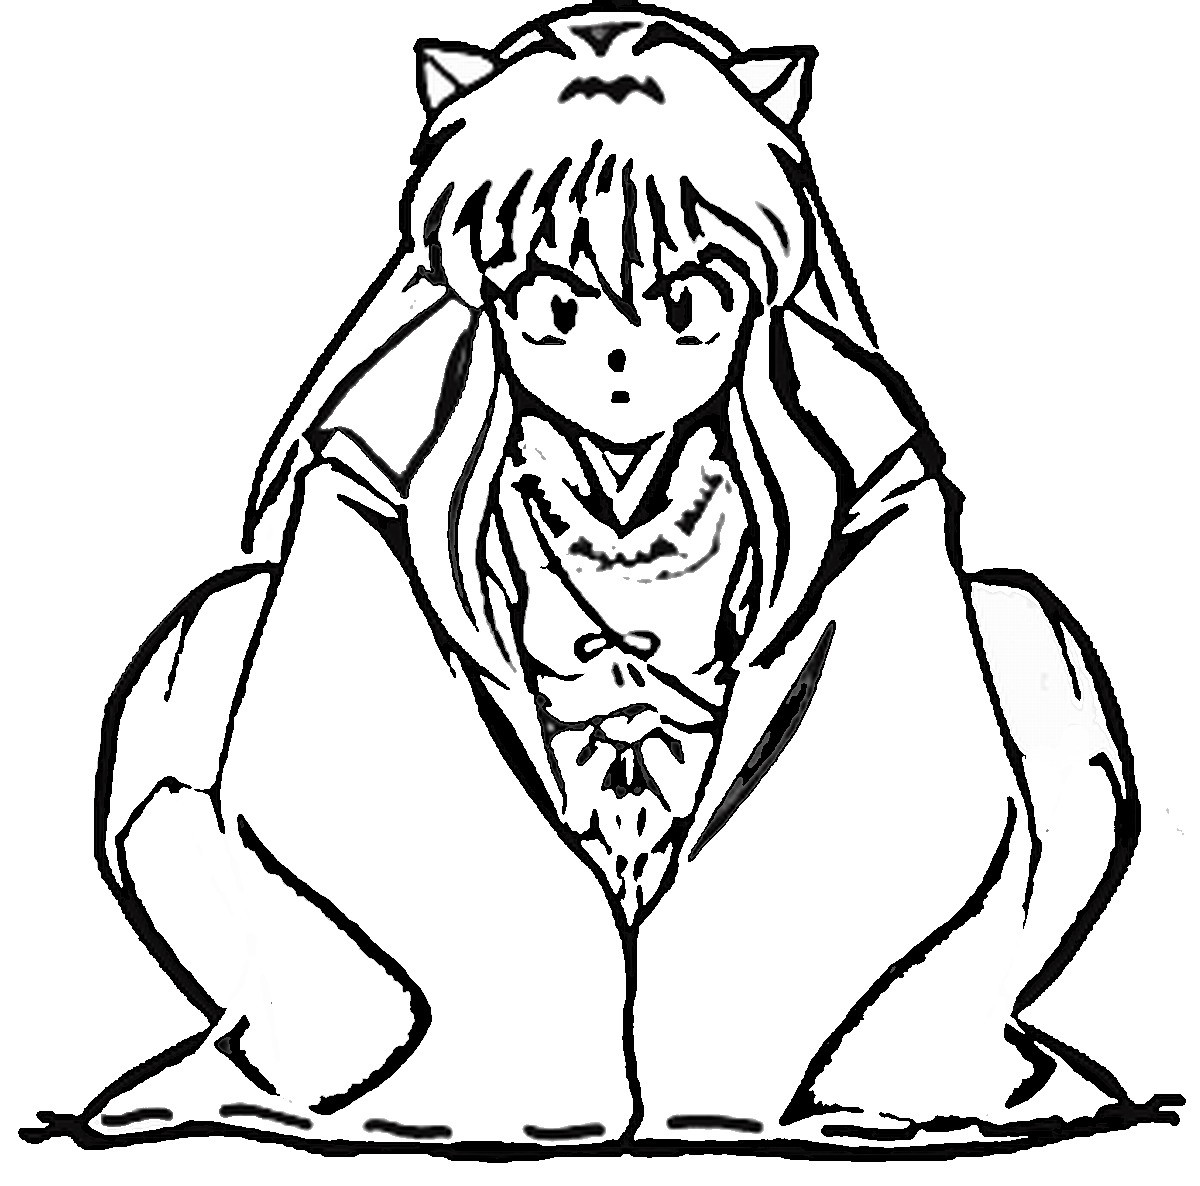 Inuyasha Printable Coloring Pages
 14 coloring pages of inuyasha Print Color Craft